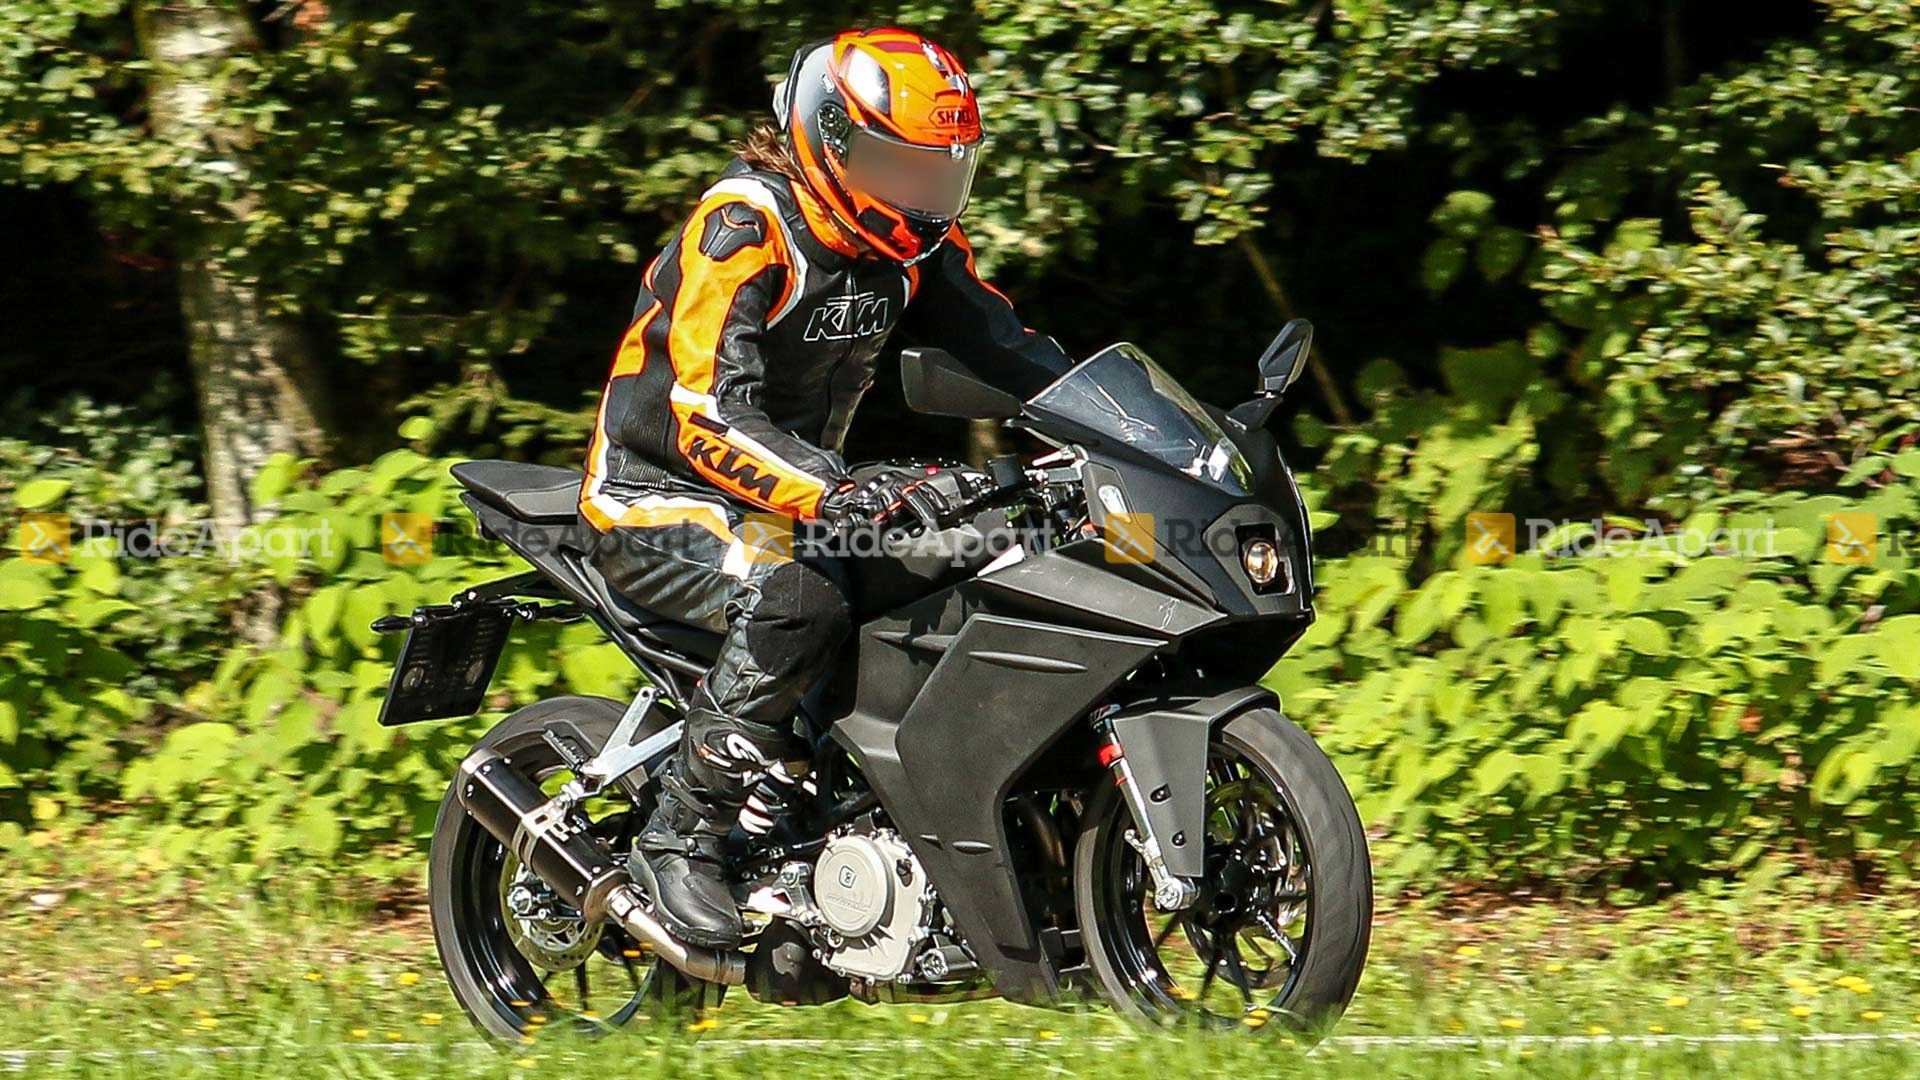 New KTM RC 390 India Launch